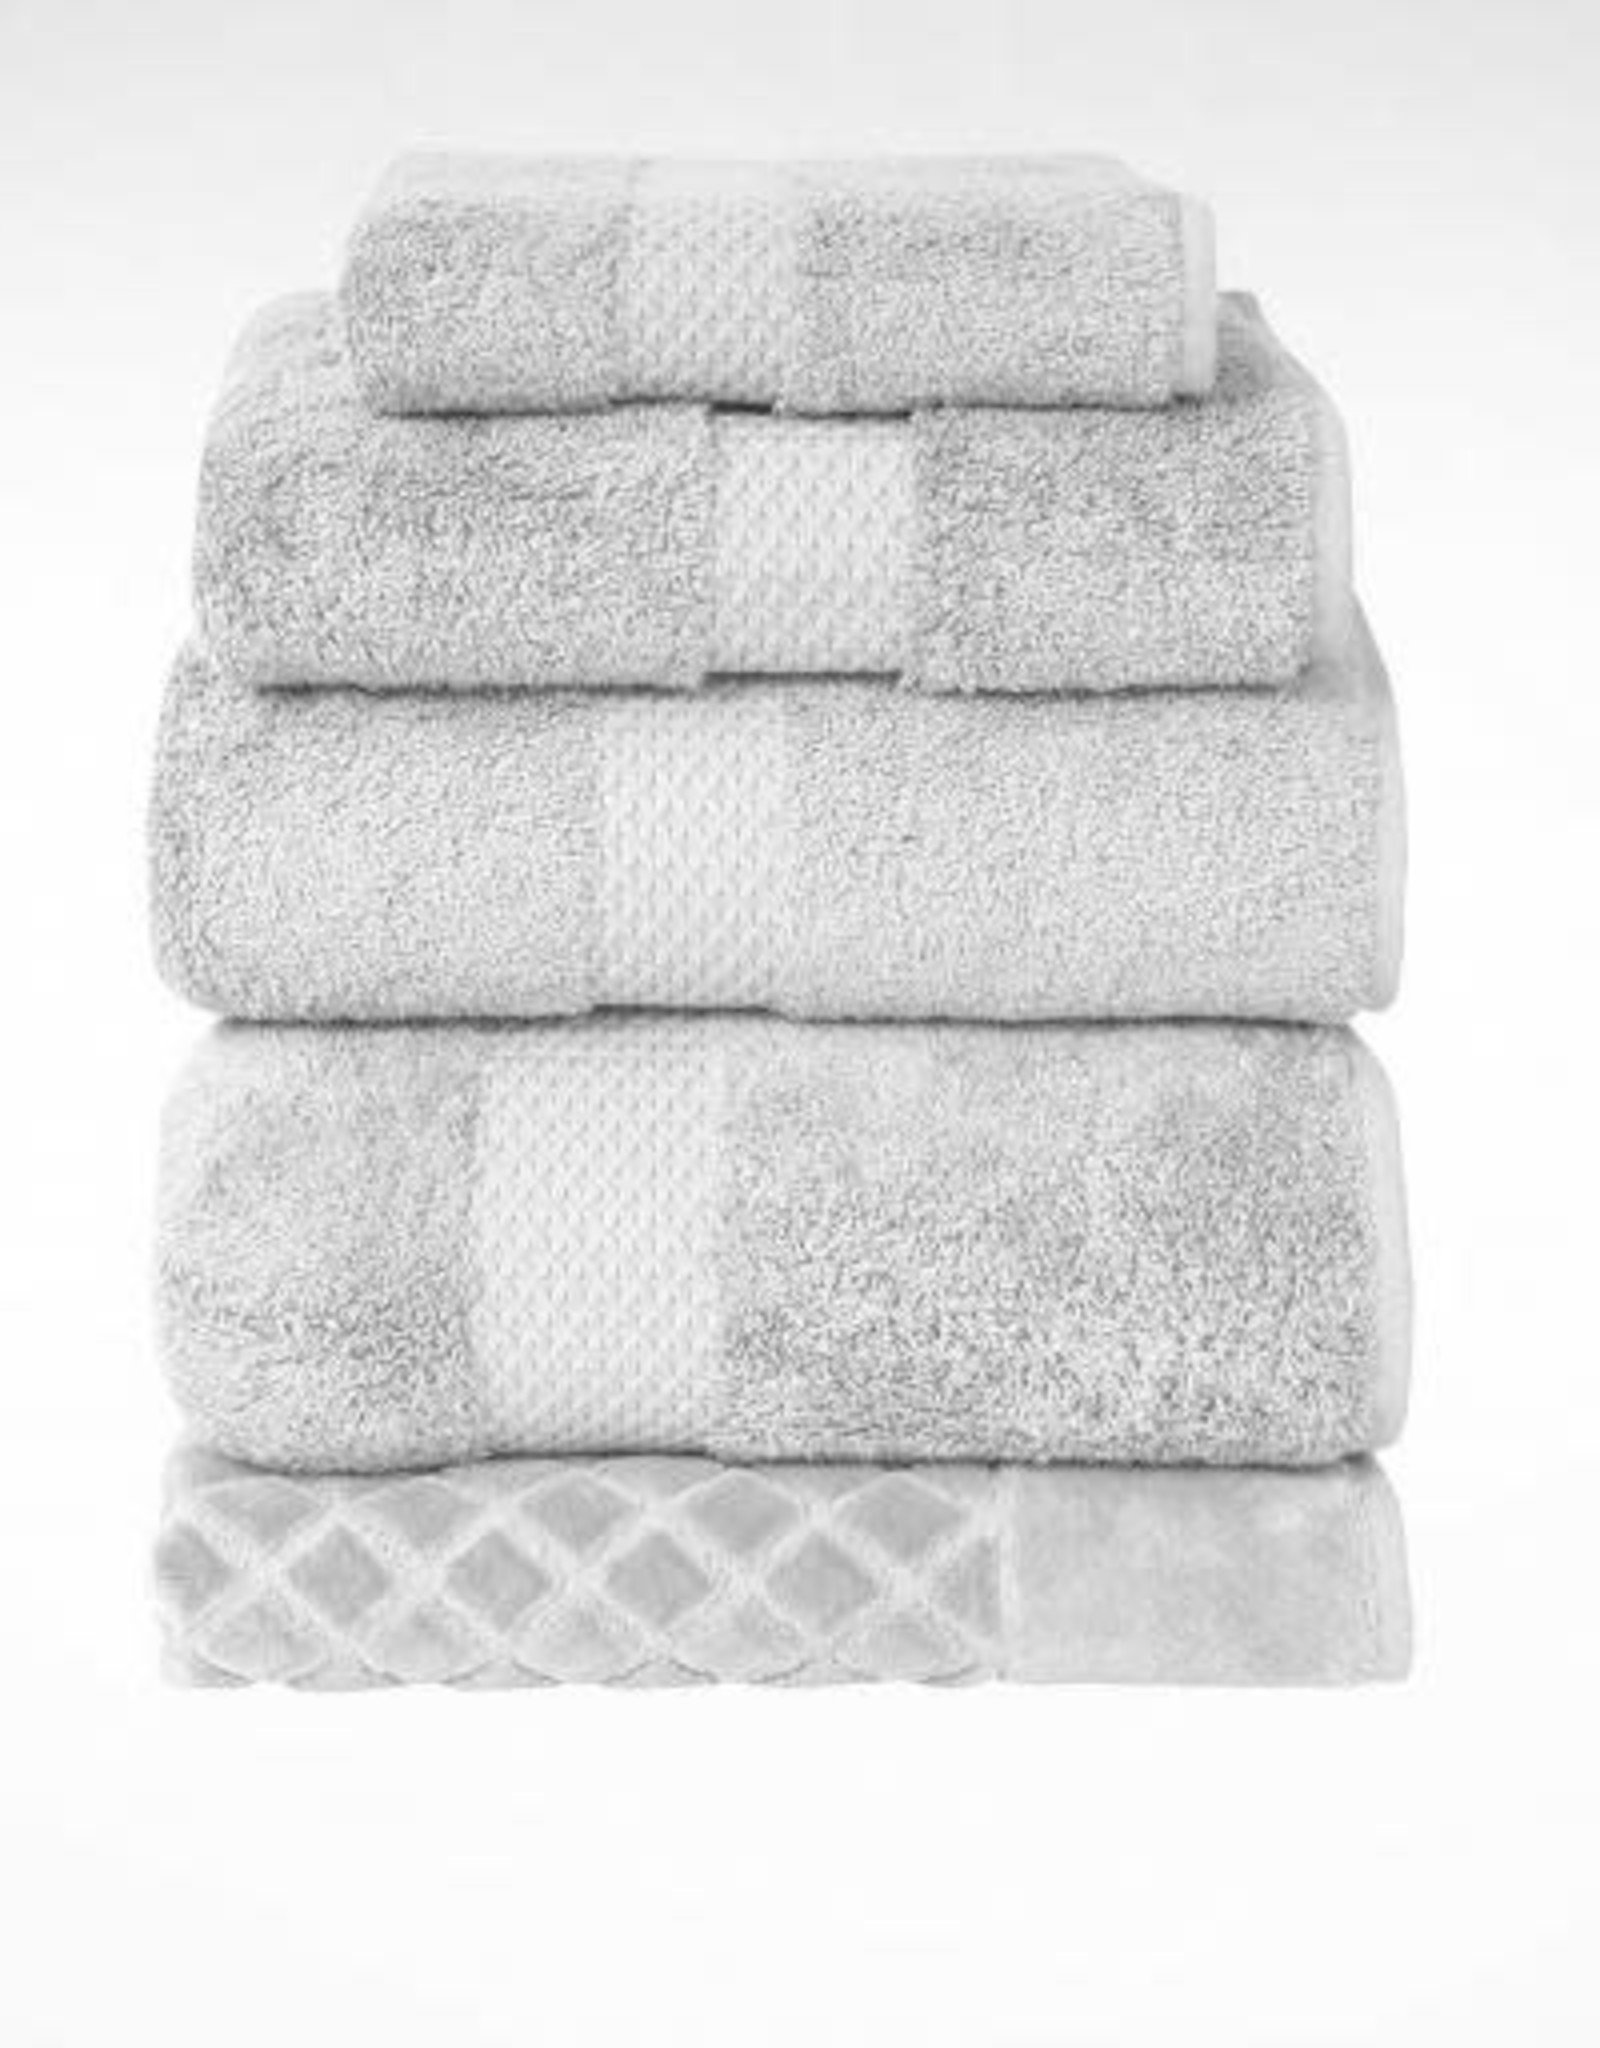 Yves Delorme Etoile Bath Towel Collection